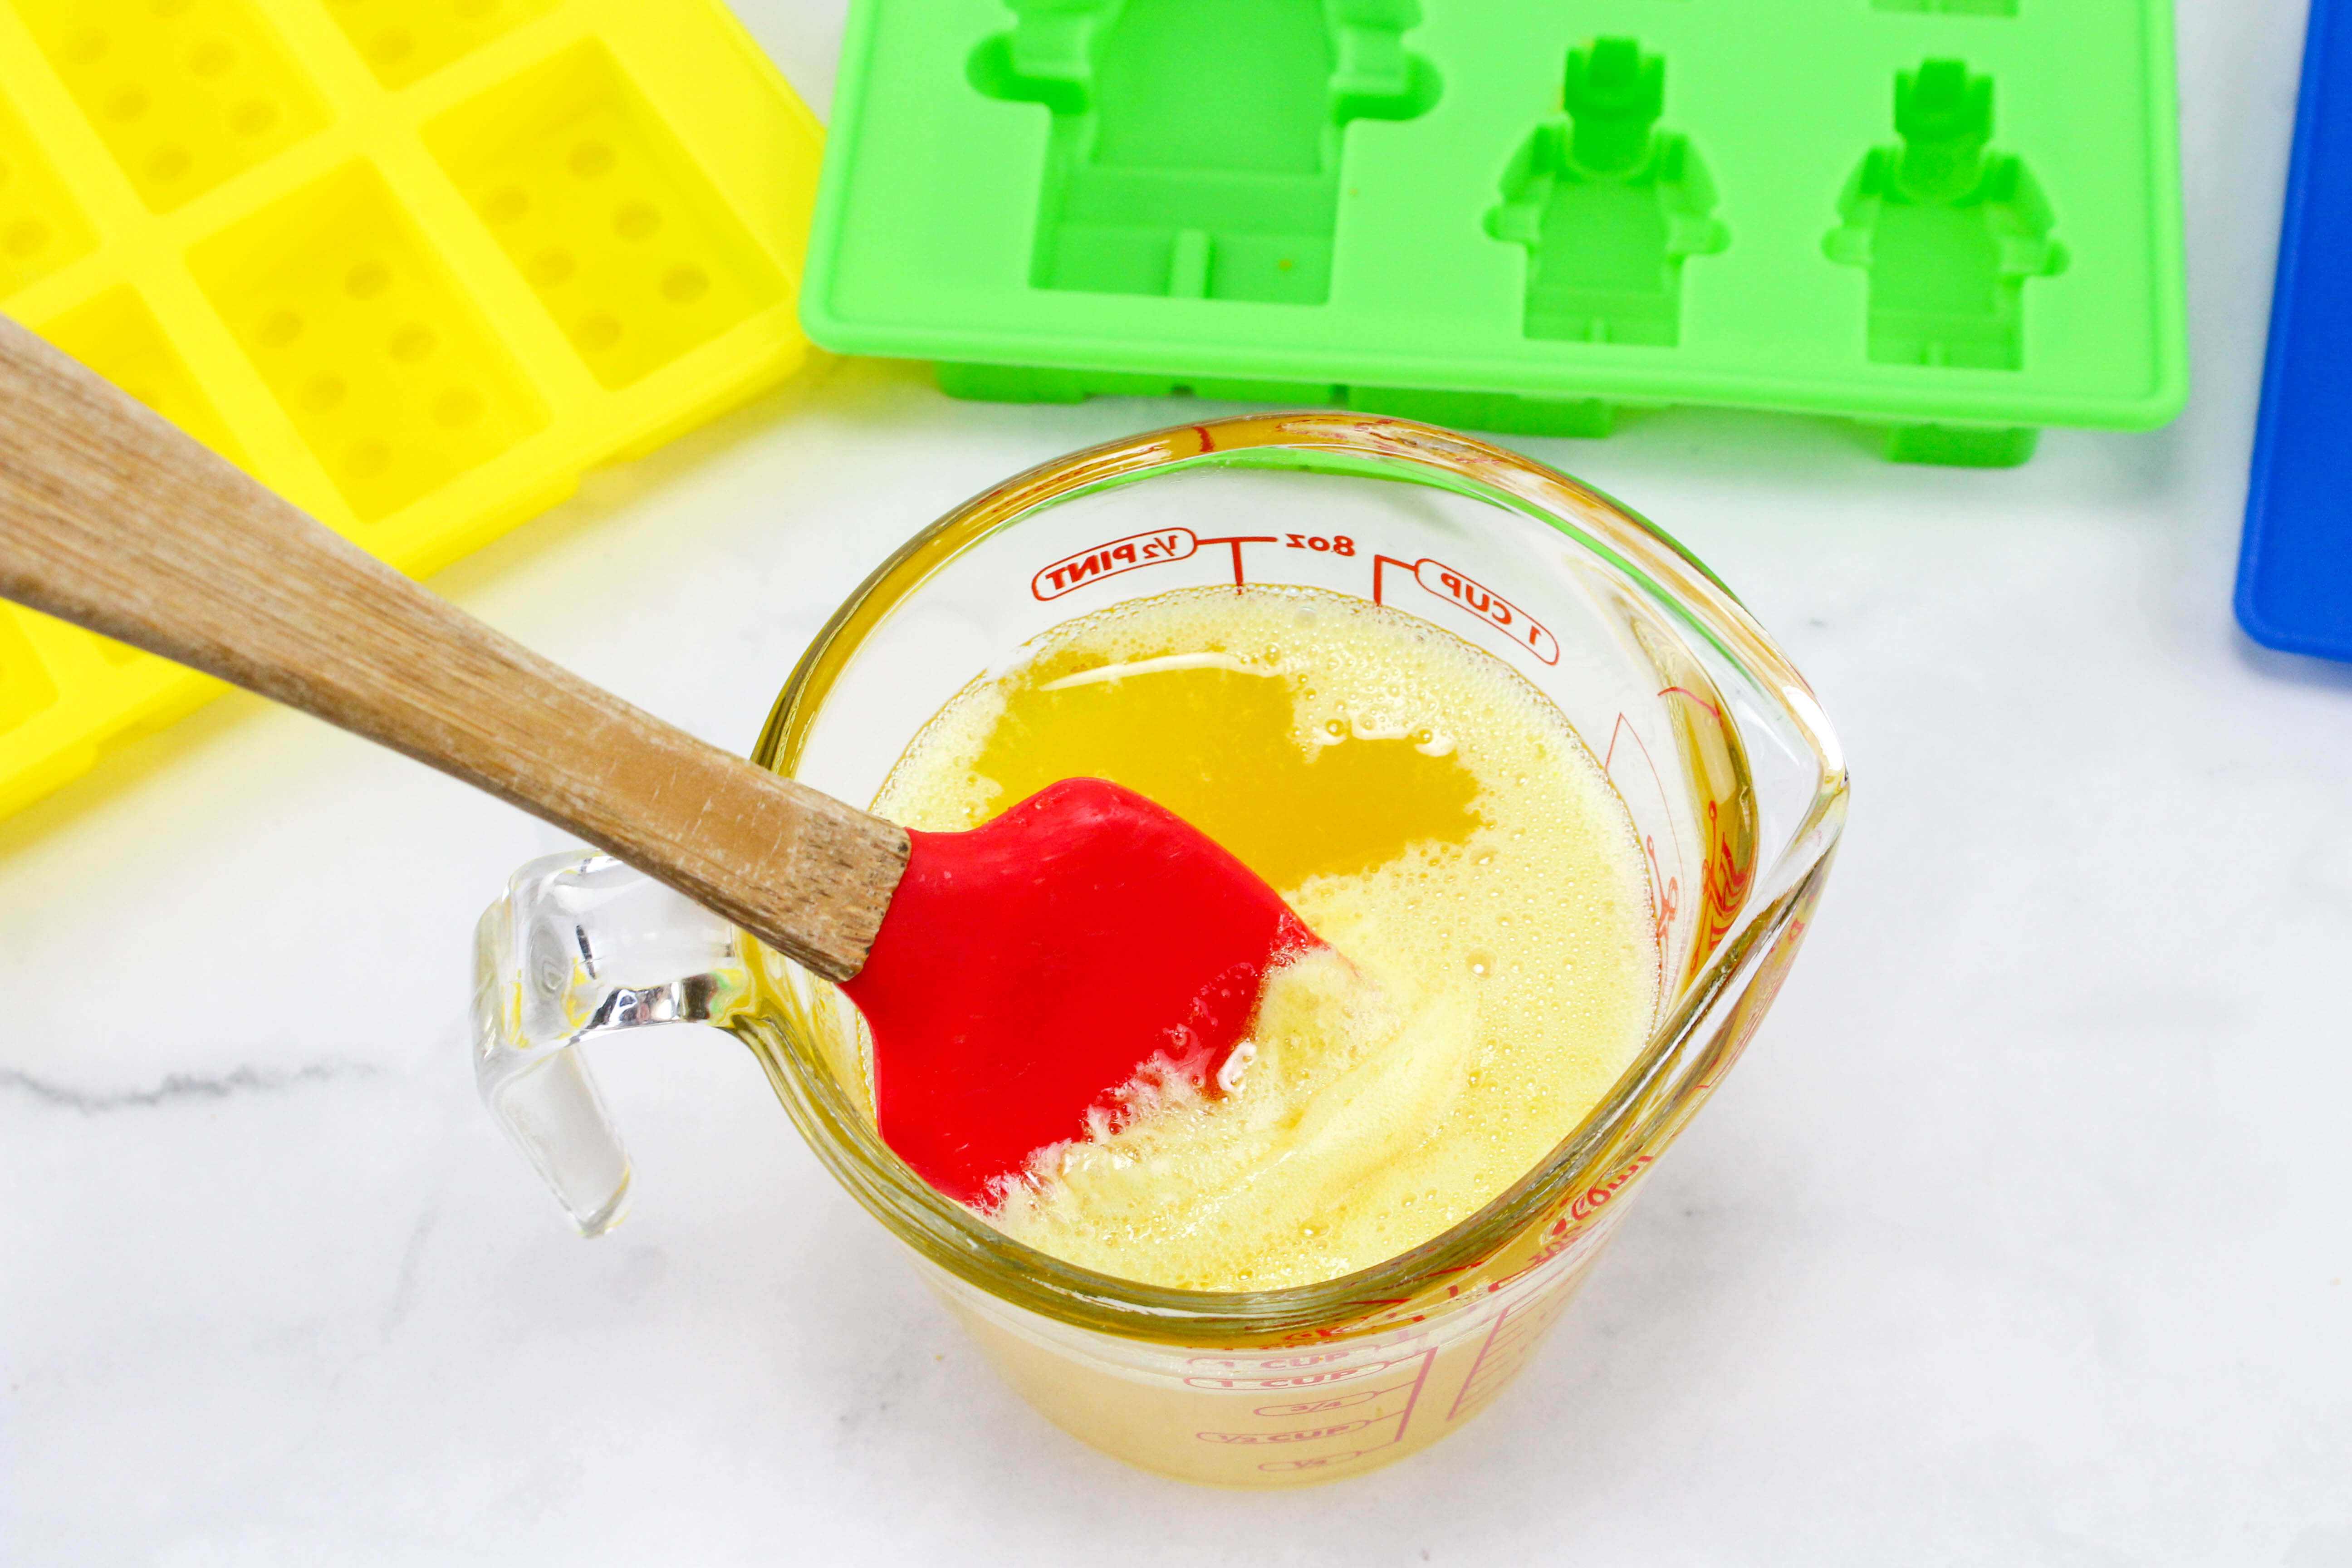 JELL-O PLAY LEGO MOLDS Jello Shots Jigglers Candy Top Bottom Brick 3 Pieces